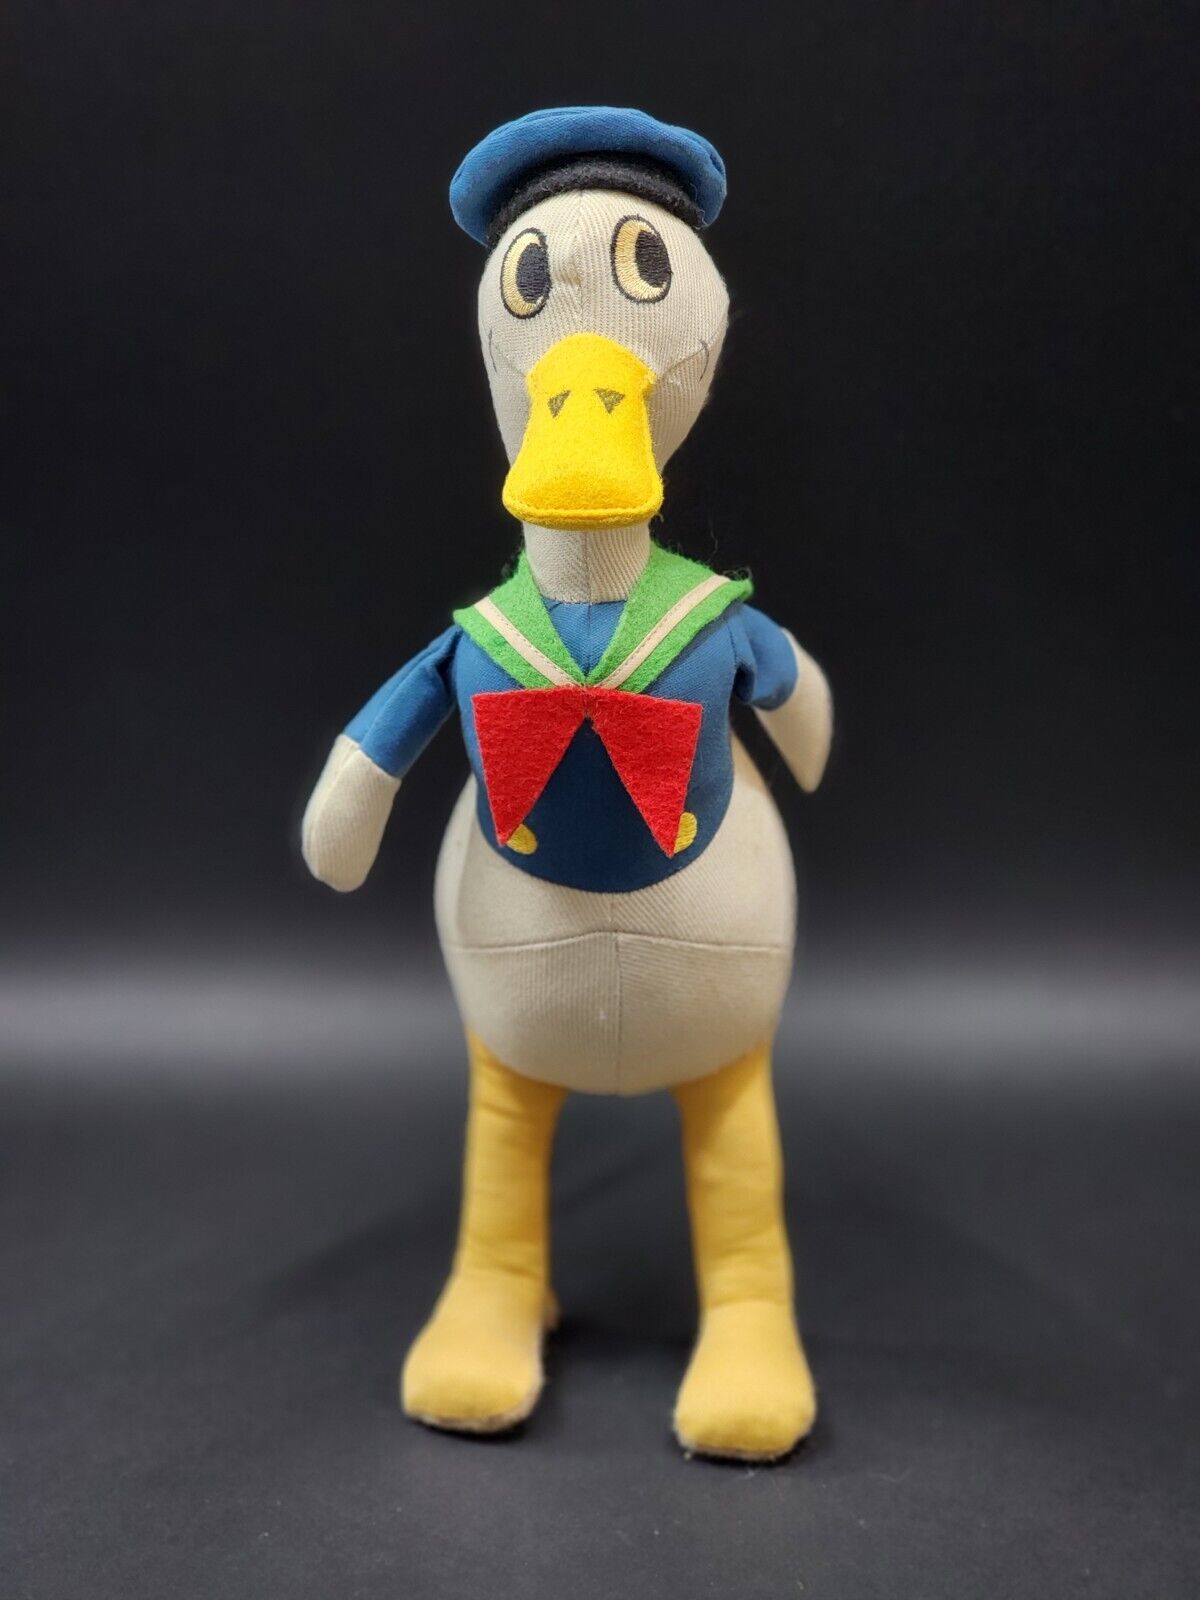 KNICKERBOCKER TOY CO. DONALD DUCK DOLL THE AUTHENTIC REPRODUCTION FRM THE 1930’s